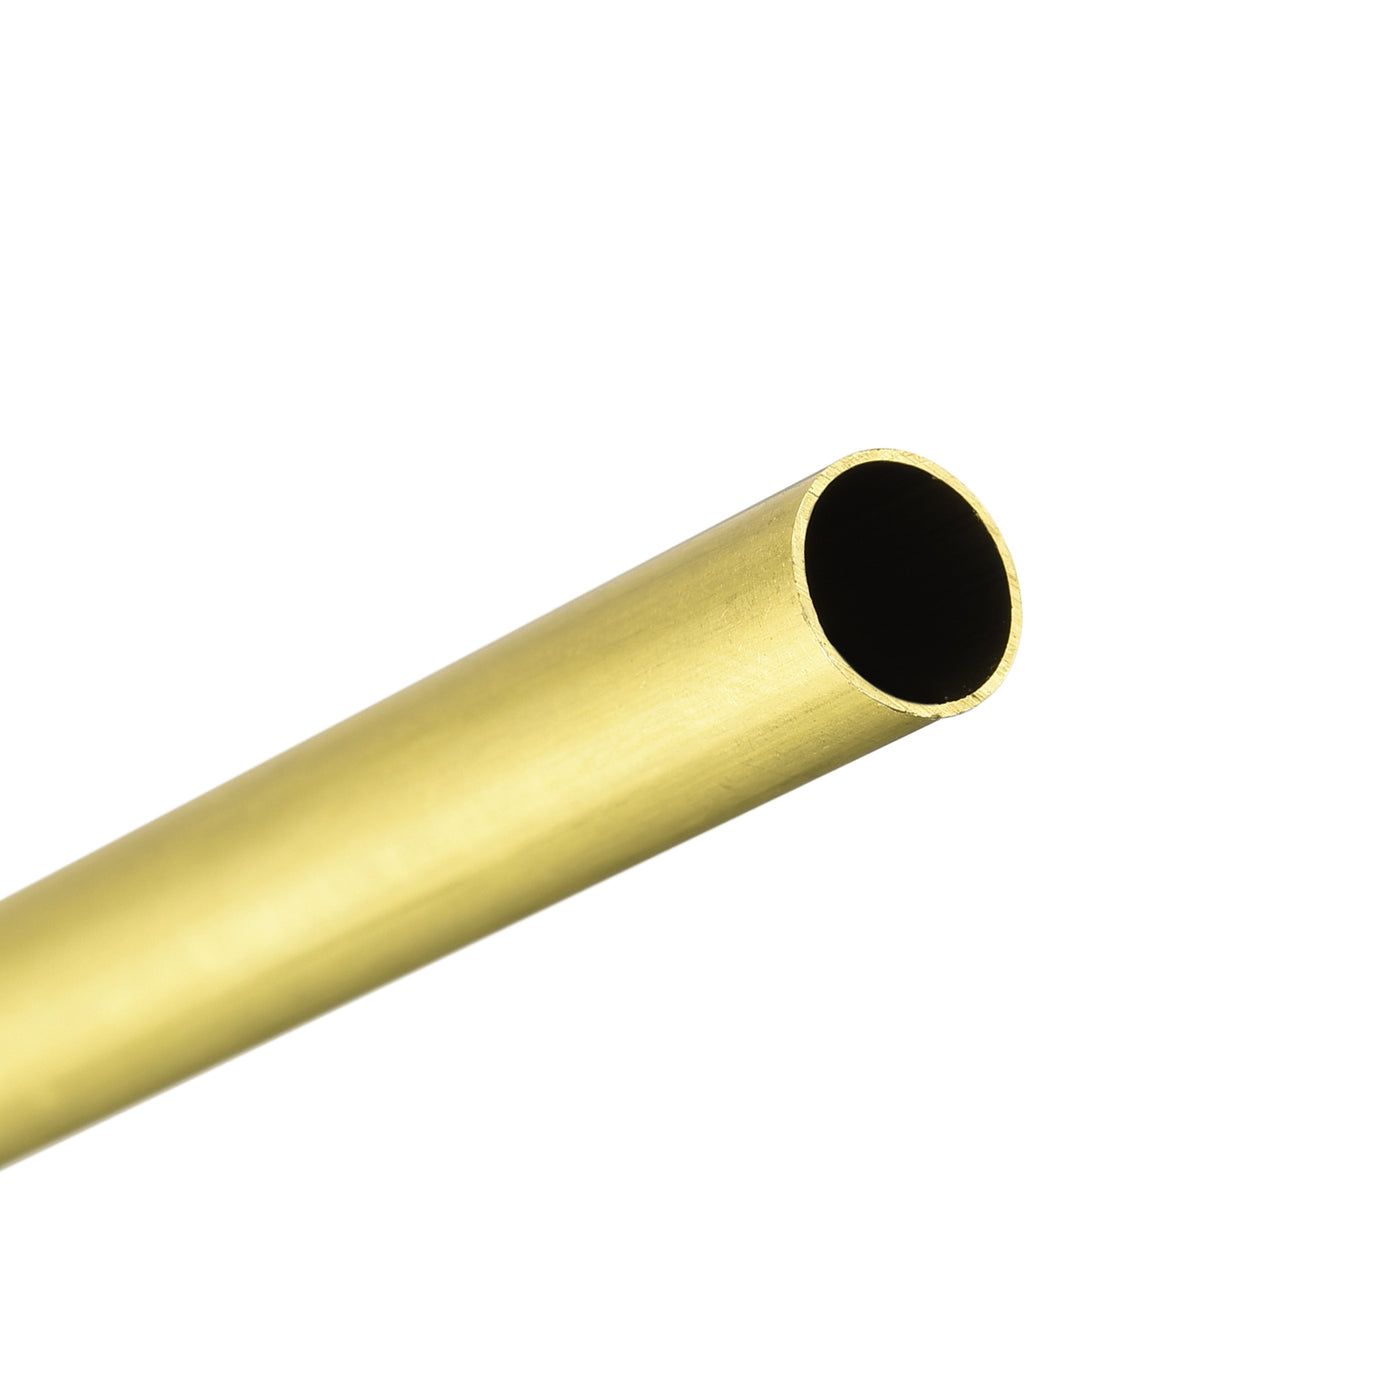 uxcell Uxcell Brass Tubing Seamless Straight Pipe Tube